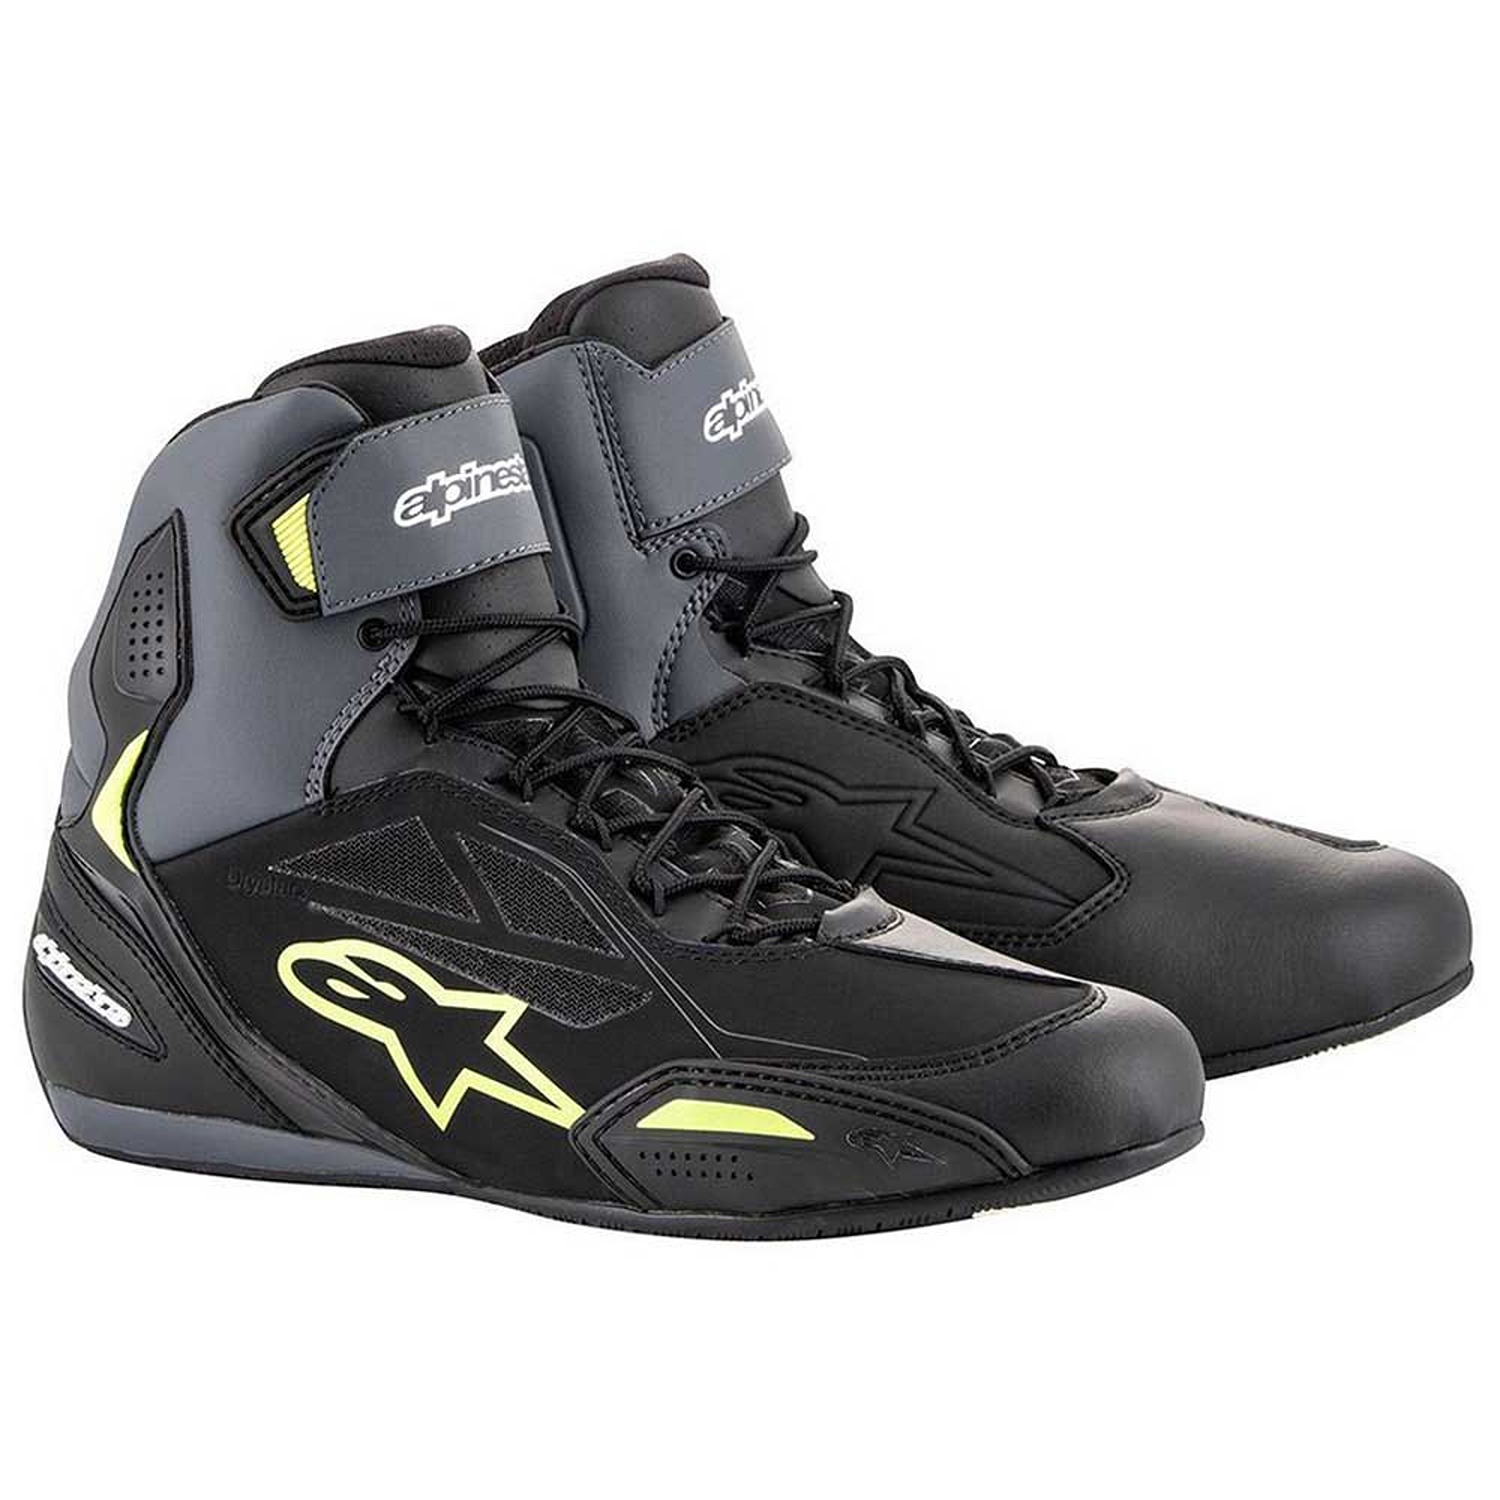 Image of Alpinestars Faster-3 Shoes Black Yellow Fluo Größe US 14